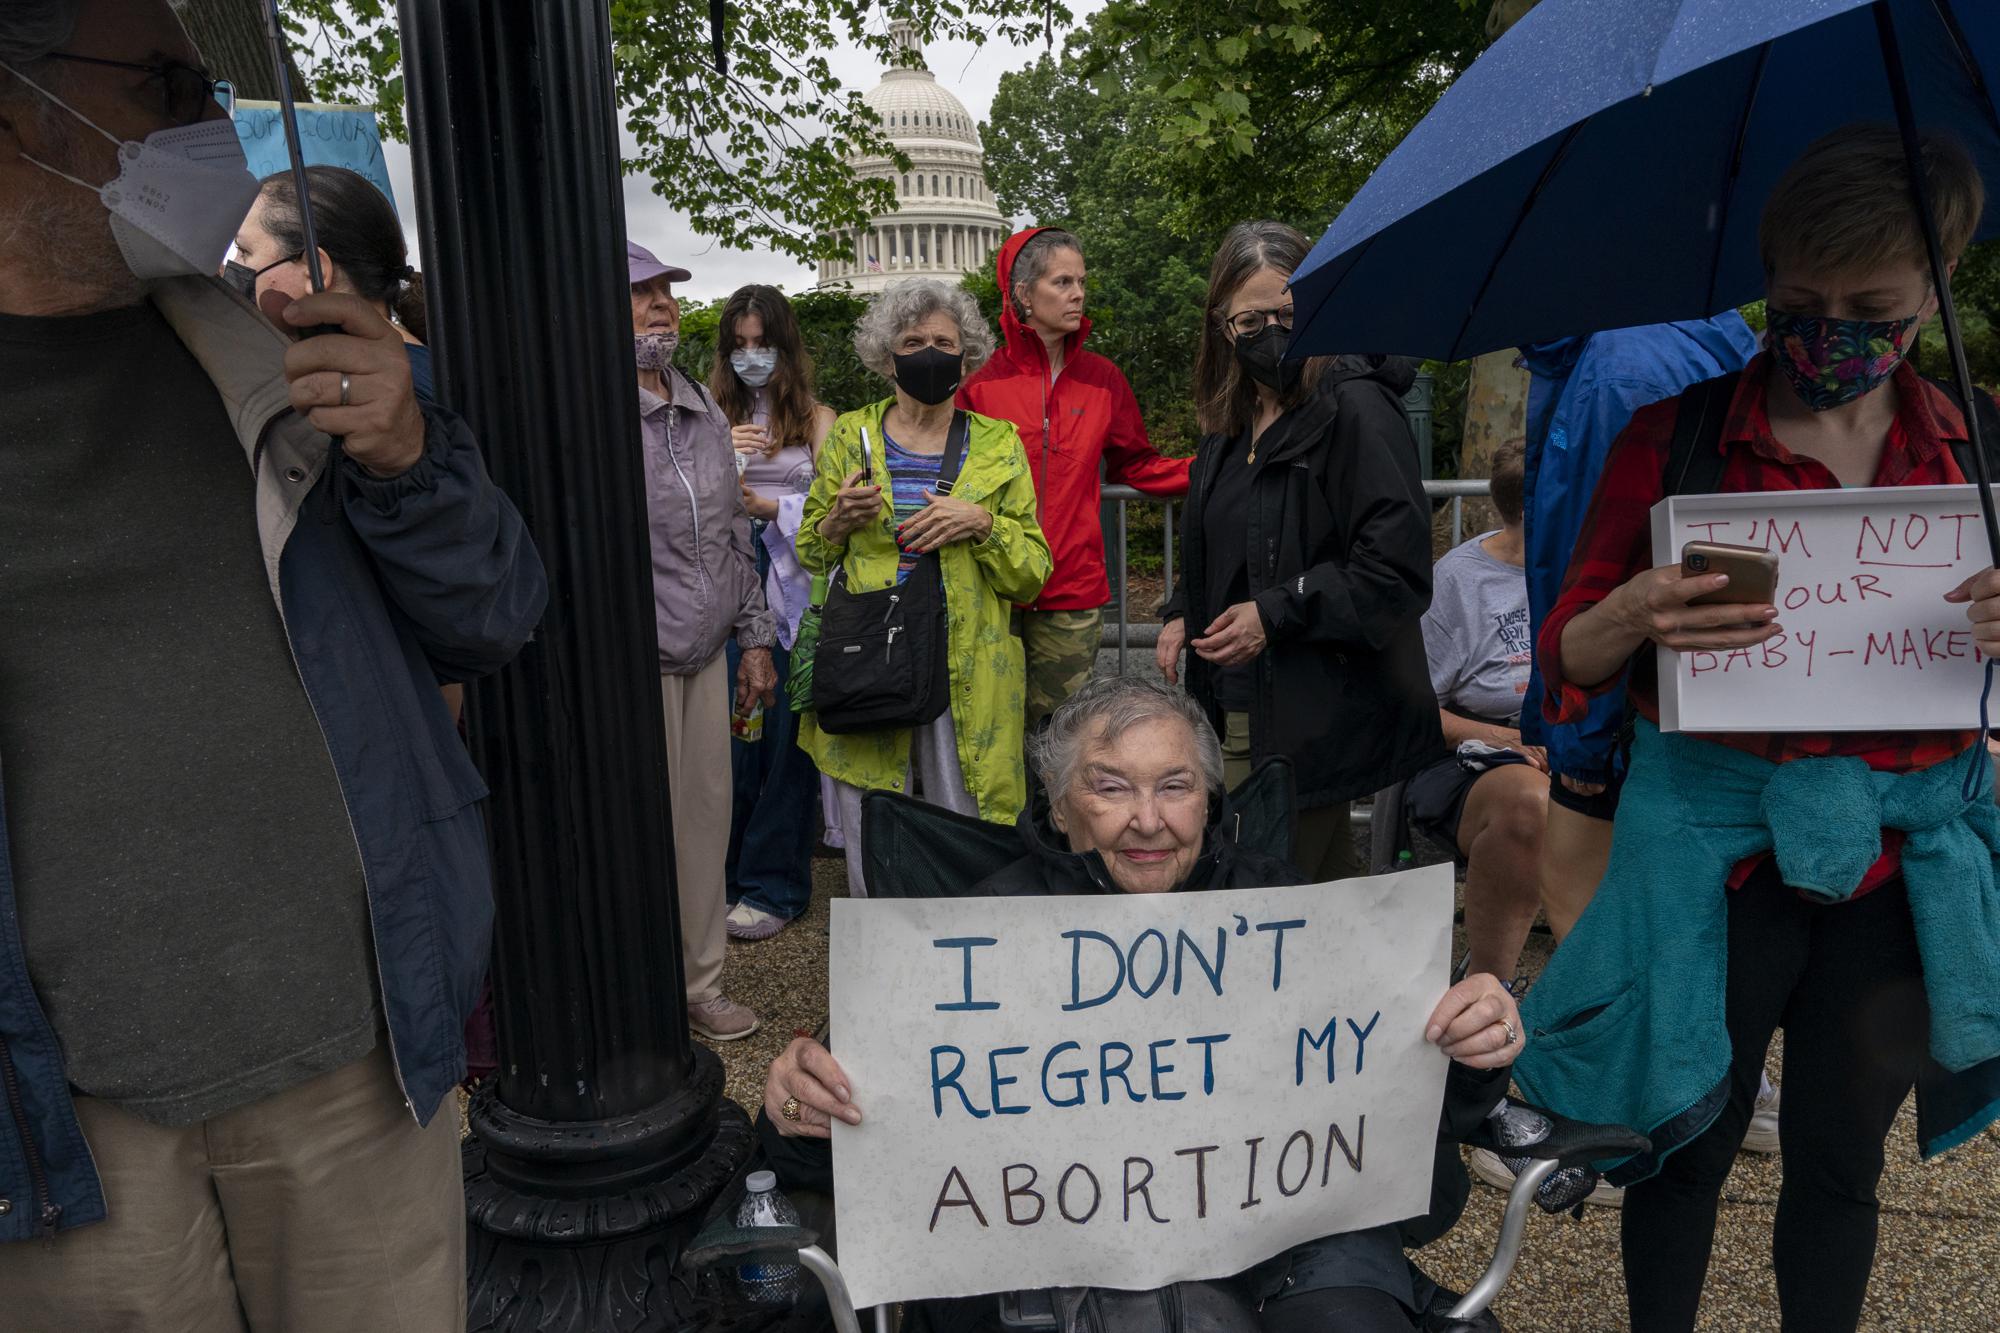 Benita Lubic, 85, of Washington, holds a sign saying, "I don't regret my abortion," as she poses for a portrait while joining abortion rights demonstrators, Saturday, May 14, 2022, by the U.S. Capitol across from the Supreme Court in Washington. "I had an abortion in 1968," says Lubic, "three children was enough and I'm not unhappy about my decision. But I had to see a psychiatrist to get his approval, it was a sham." Lubic and her daughter came out to protest. "I want to protect children who are raped from being denied an abortion," says Lubic, "I'm just sorry that Ruth Bader Ginsburg isn't alive to support us." (AP Photo/Jacquelyn Martin)